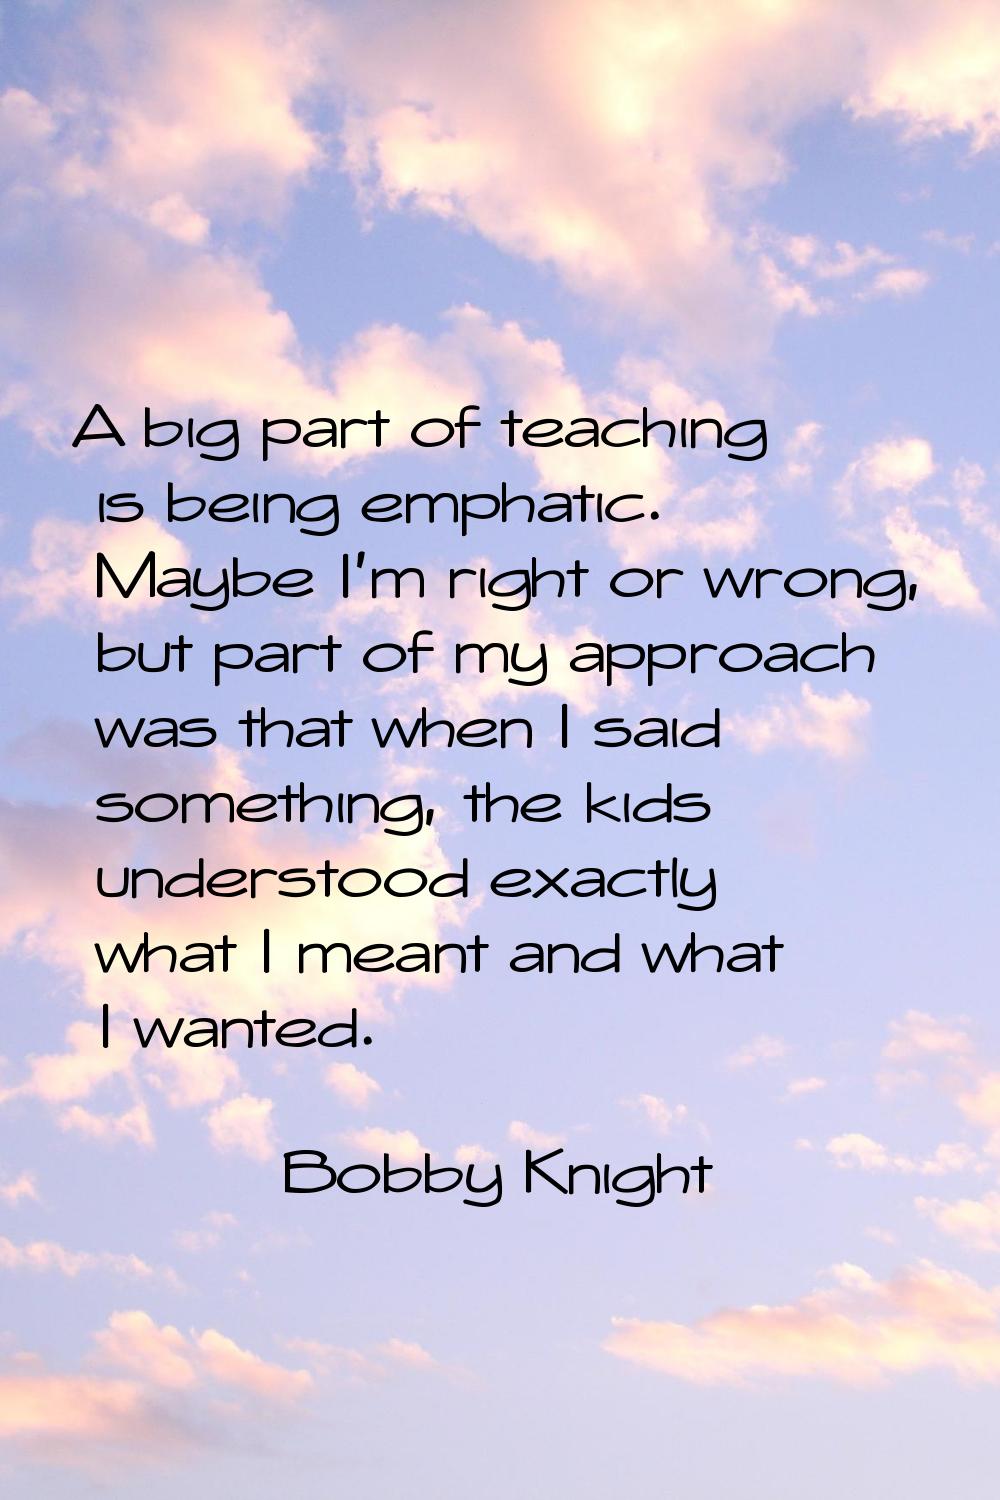 A big part of teaching is being emphatic. Maybe I'm right or wrong, but part of my approach was tha